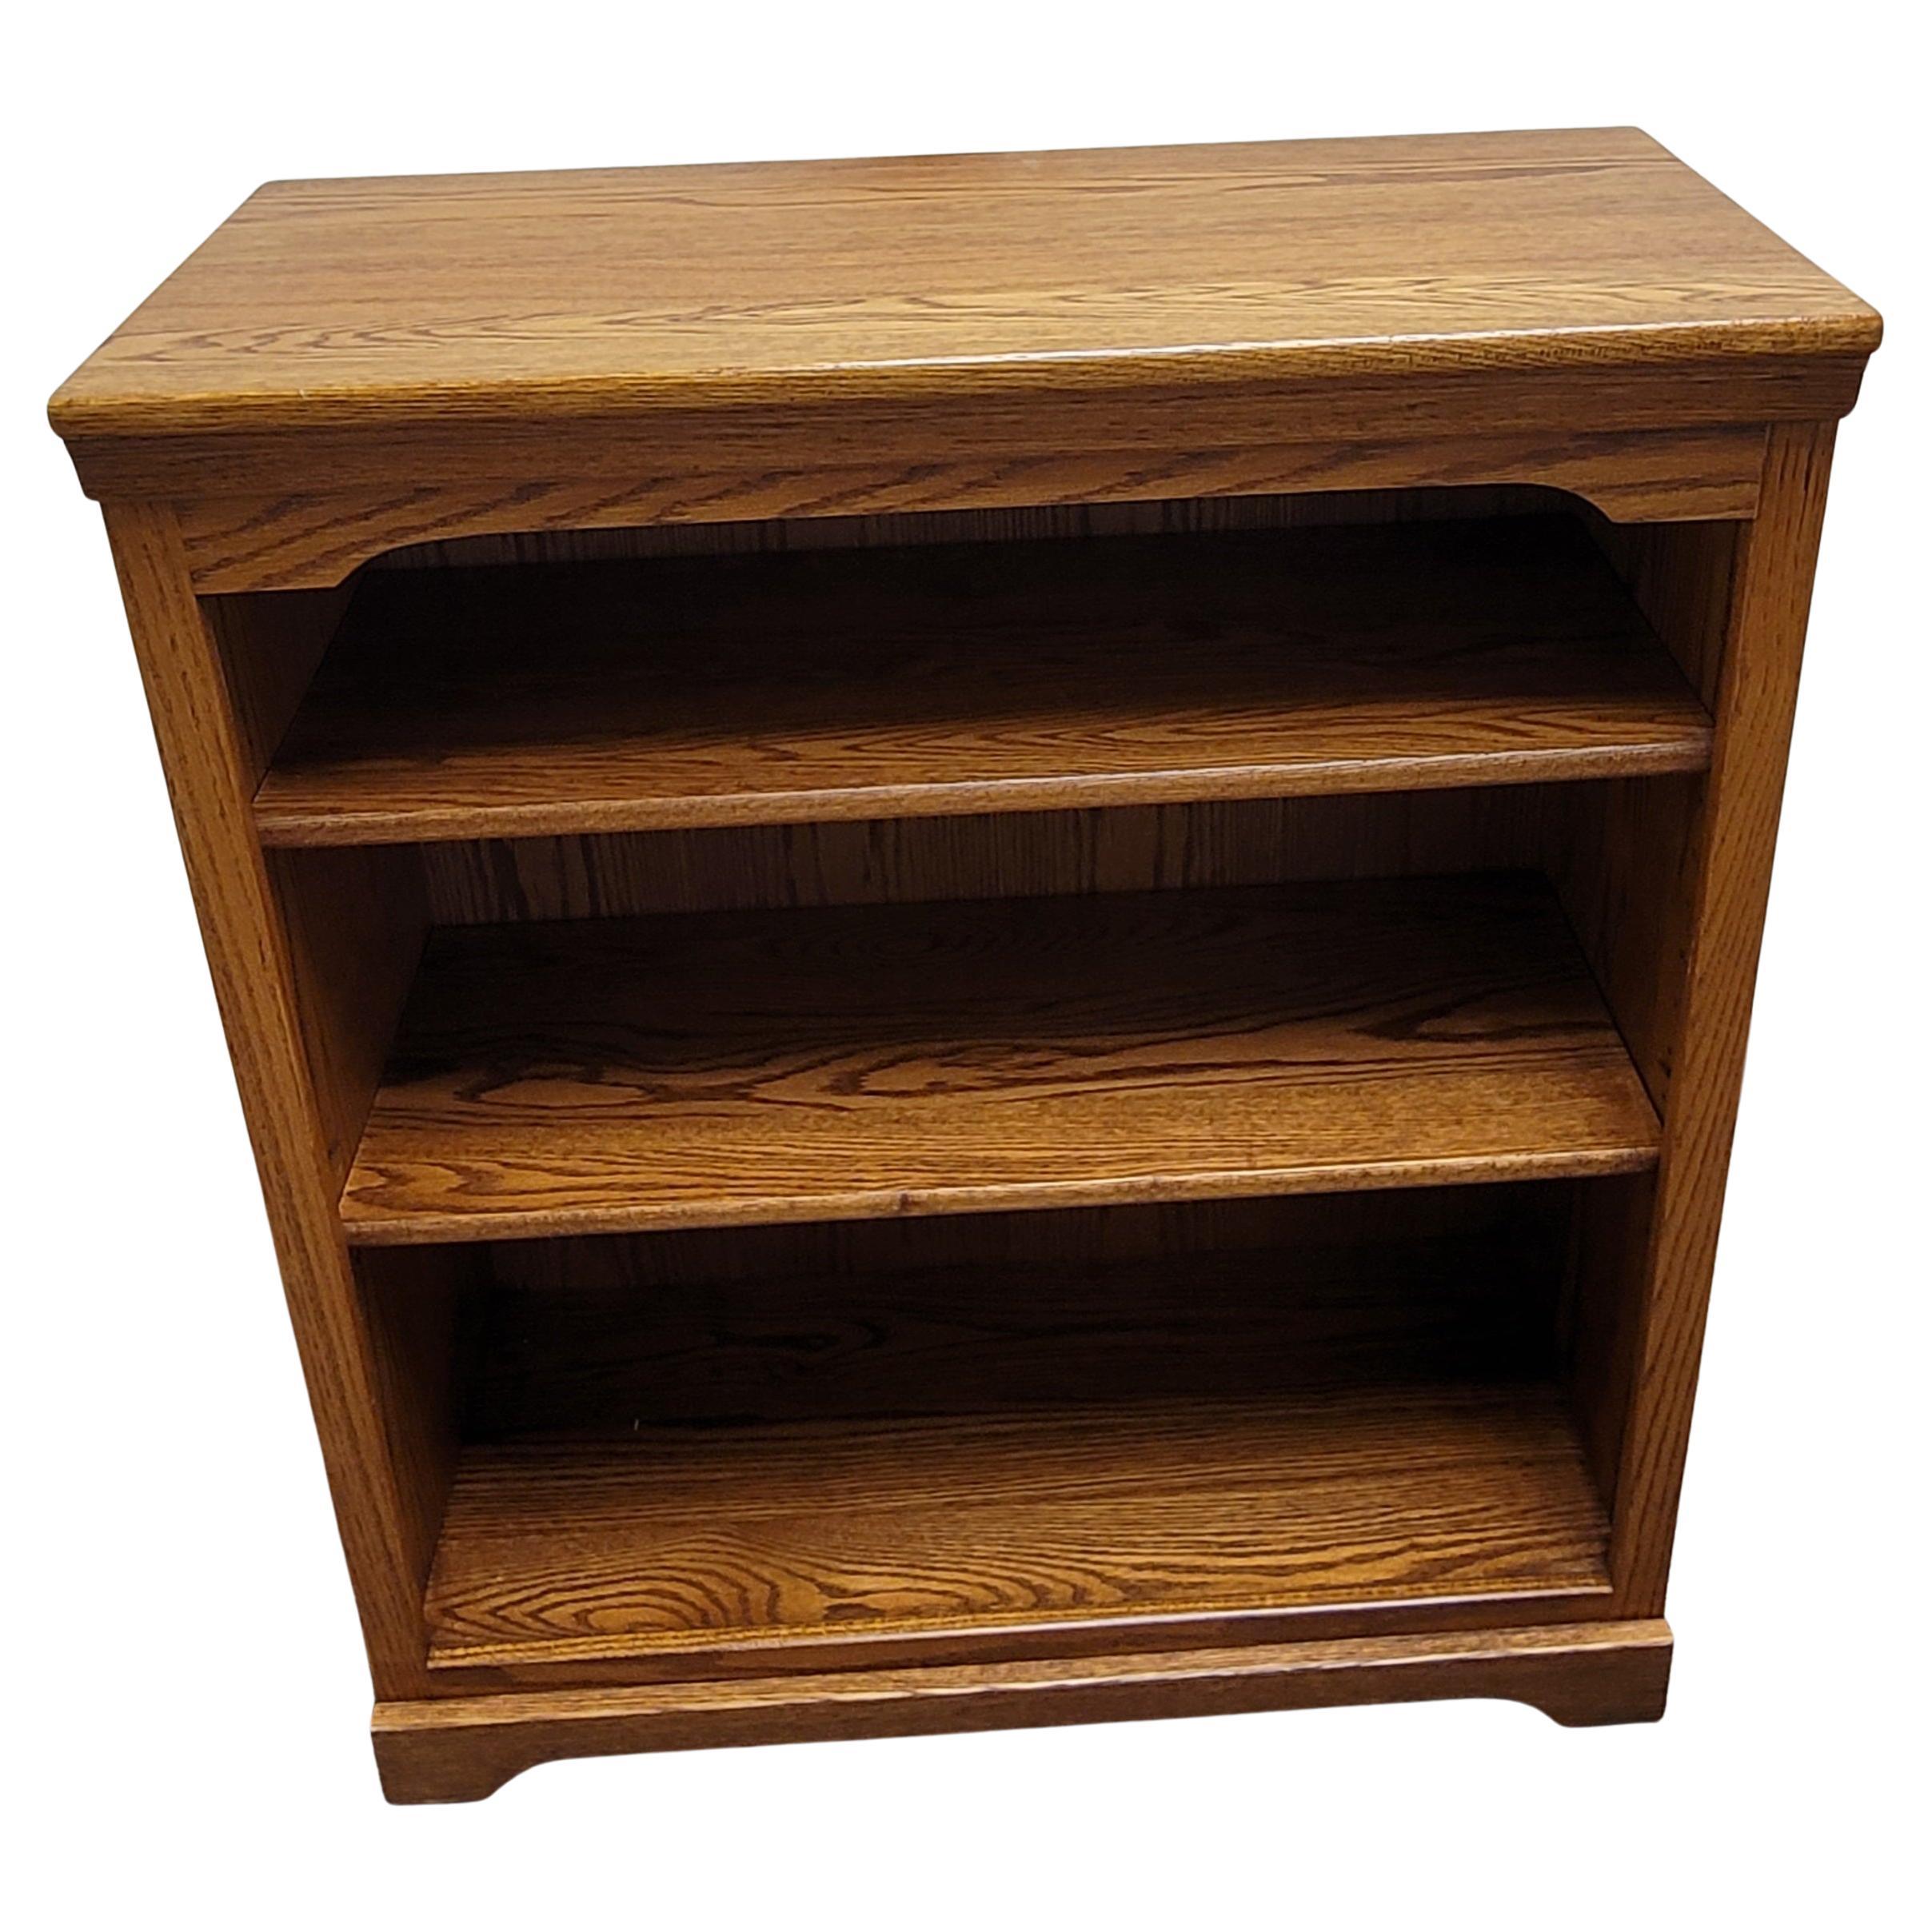 Vintage Amish Crafted Solid Oak Short Bookcase with two adjustable shelves with wood backing. Very Solid construction and in great condition.
Measures 30.75